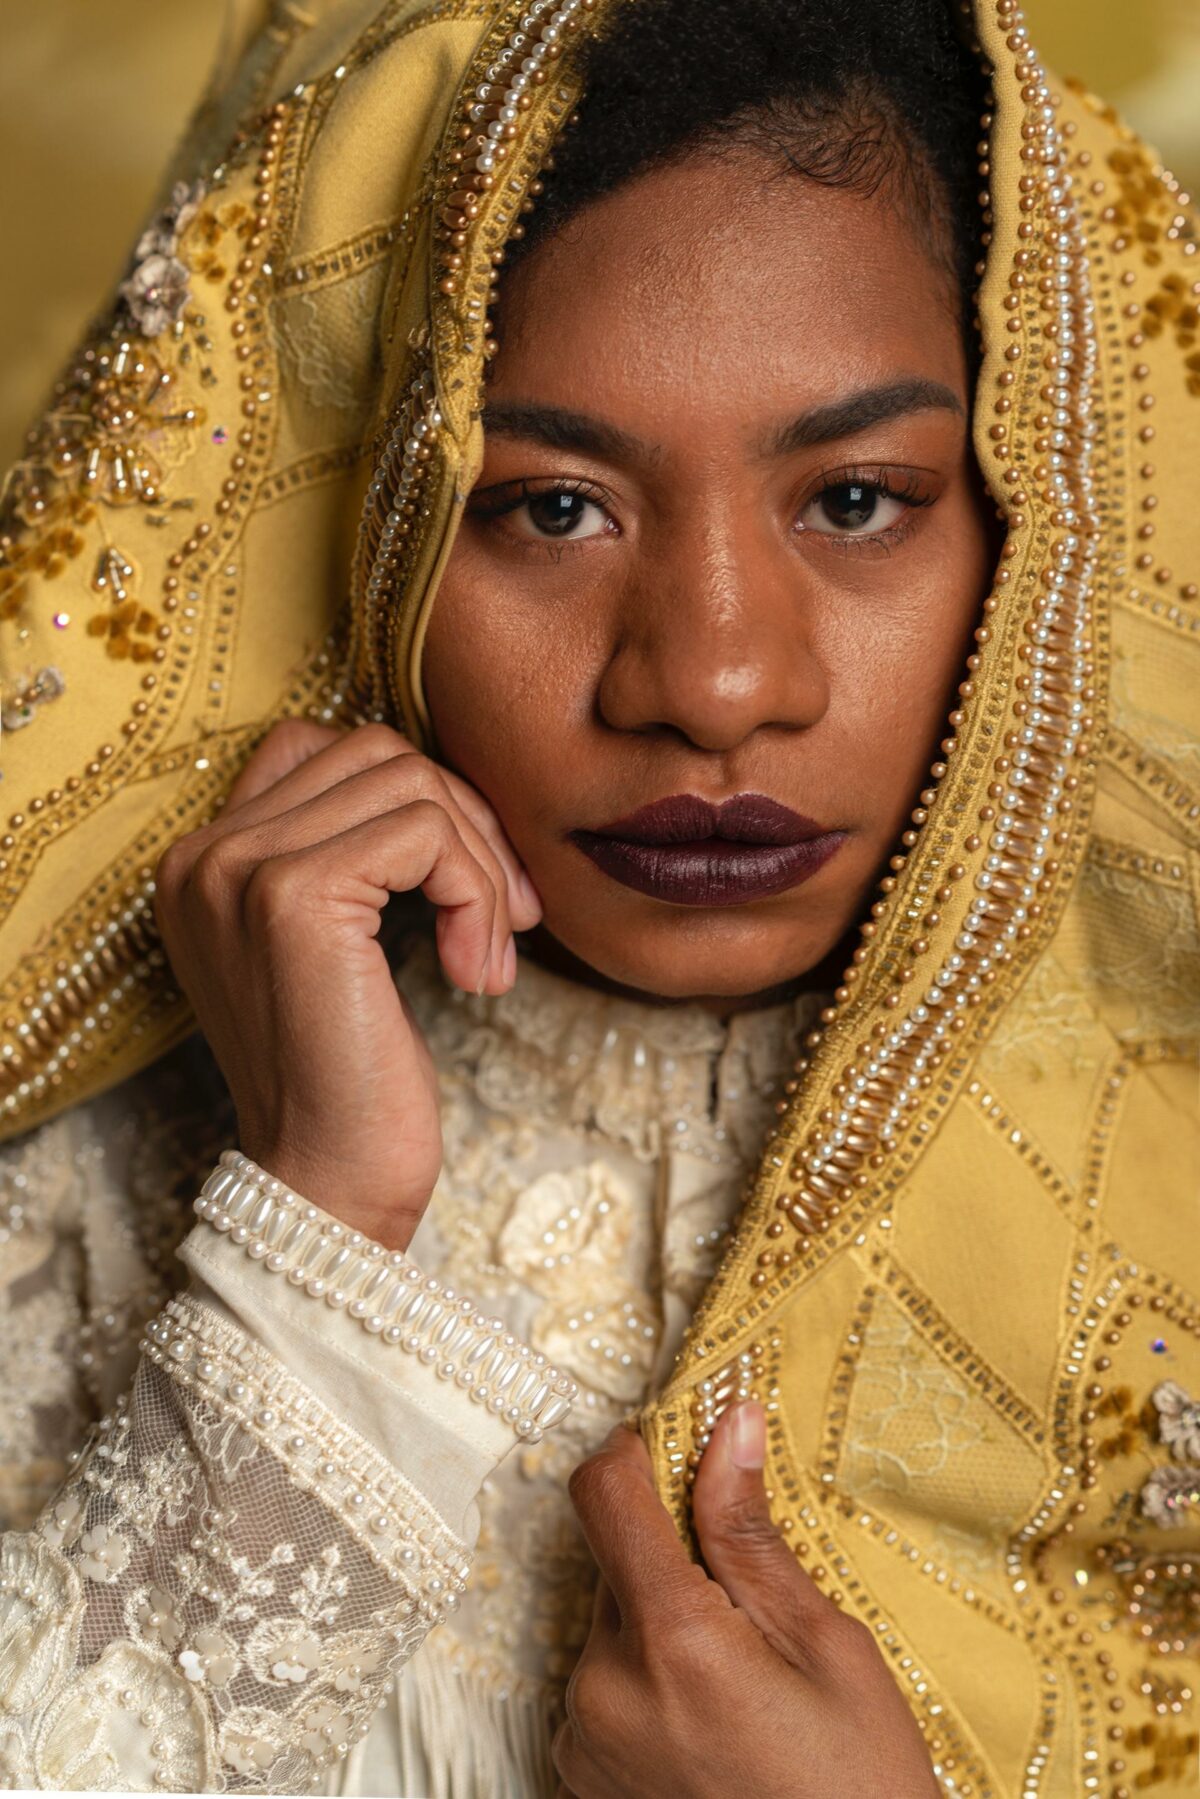 Project Puan A Gorgeous And Delicate Portrait Series On Indonesian Women By Nicoline Patricia Malina 11